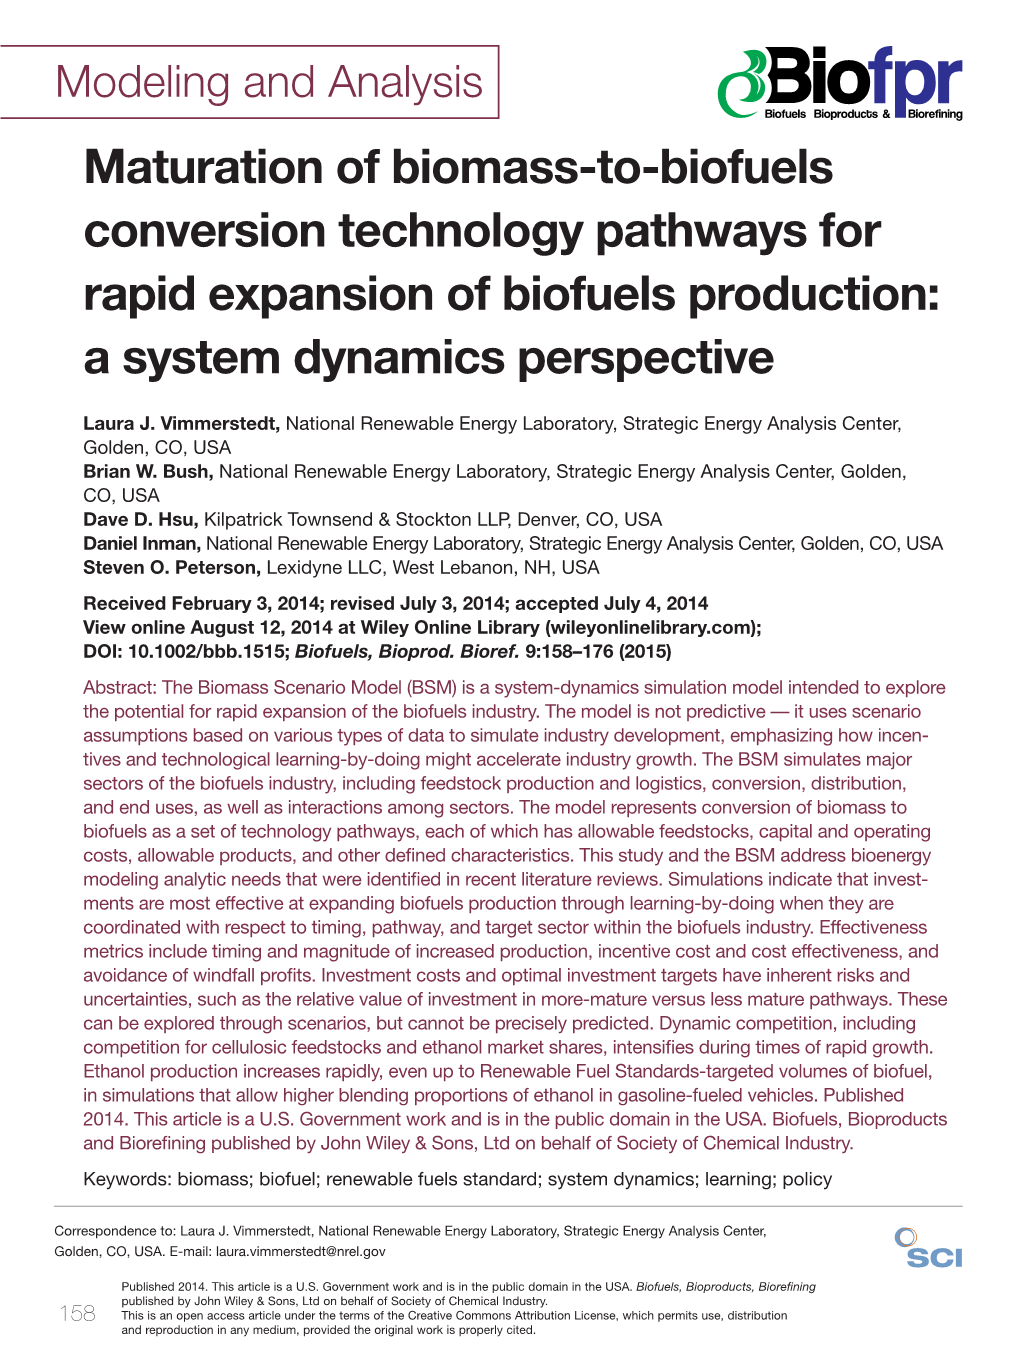 Maturation of Biomass-To-Biofuels Conversion Technology Pathways for Rapid Expansion of Biofuels Production: a System Dynamics Perspective